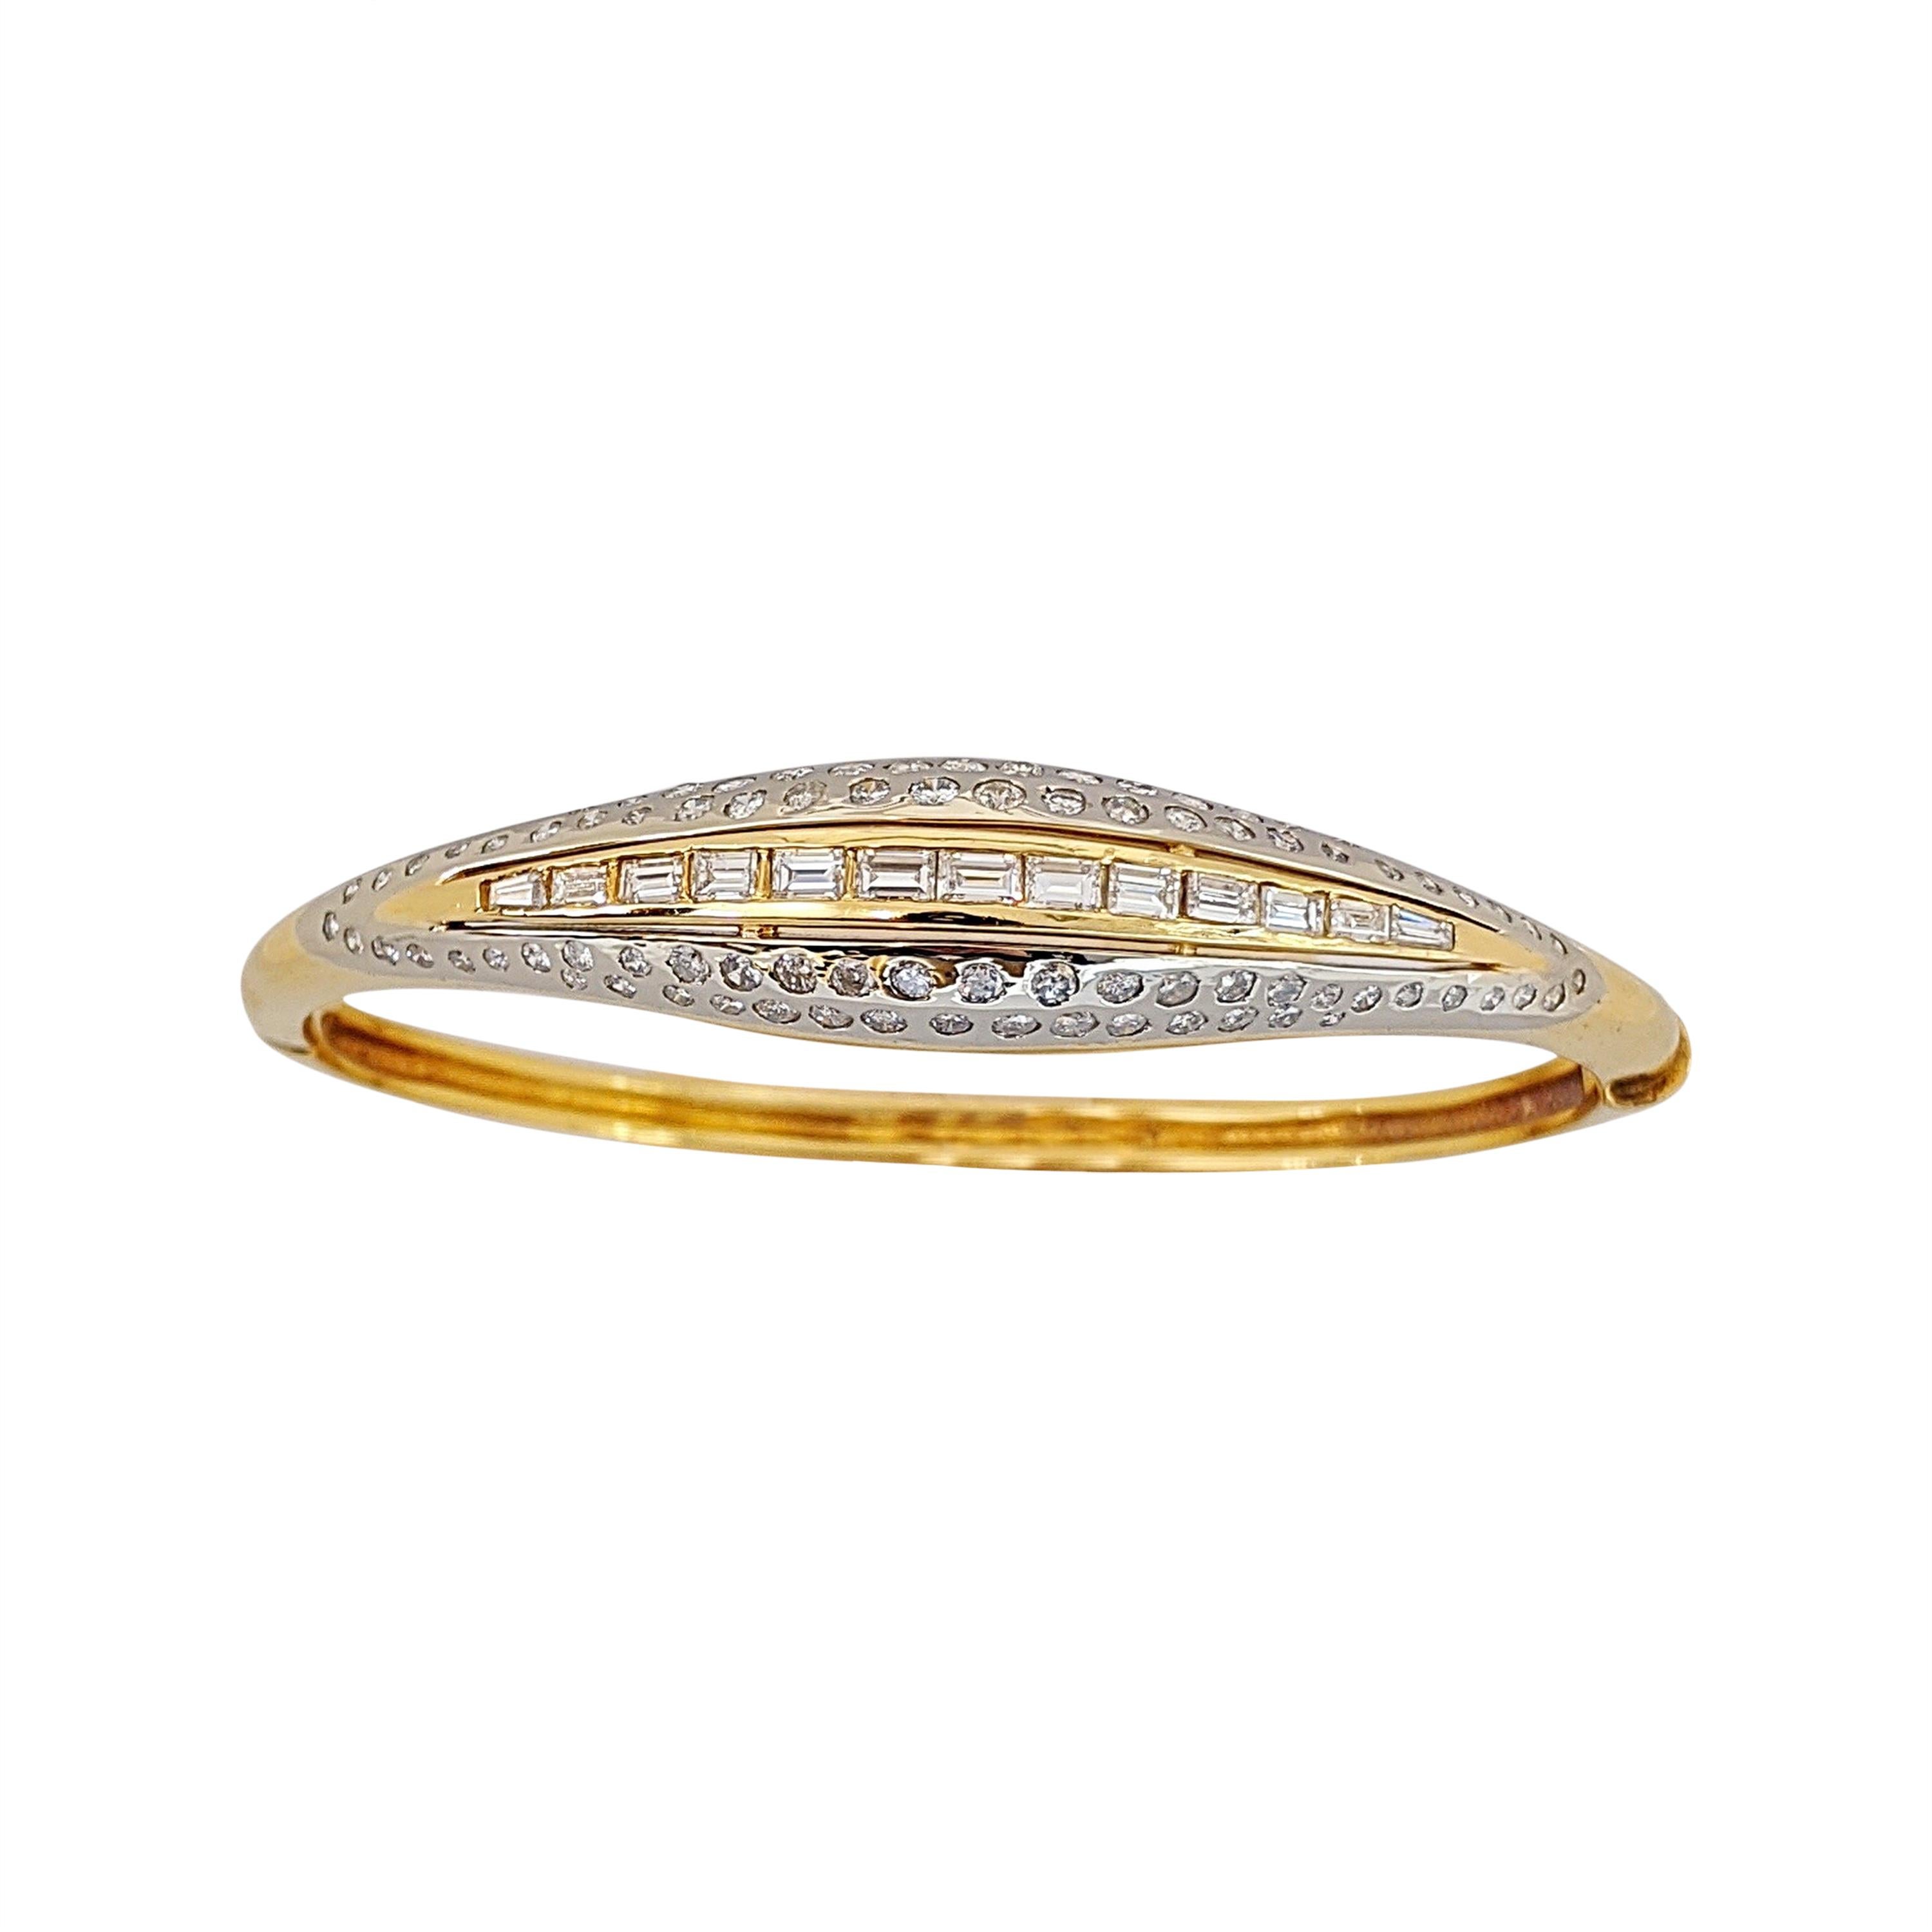 18 KT YG/WG Bangle Bracelet with 3.40 Carat Round and Baguette Diamonds For Sale